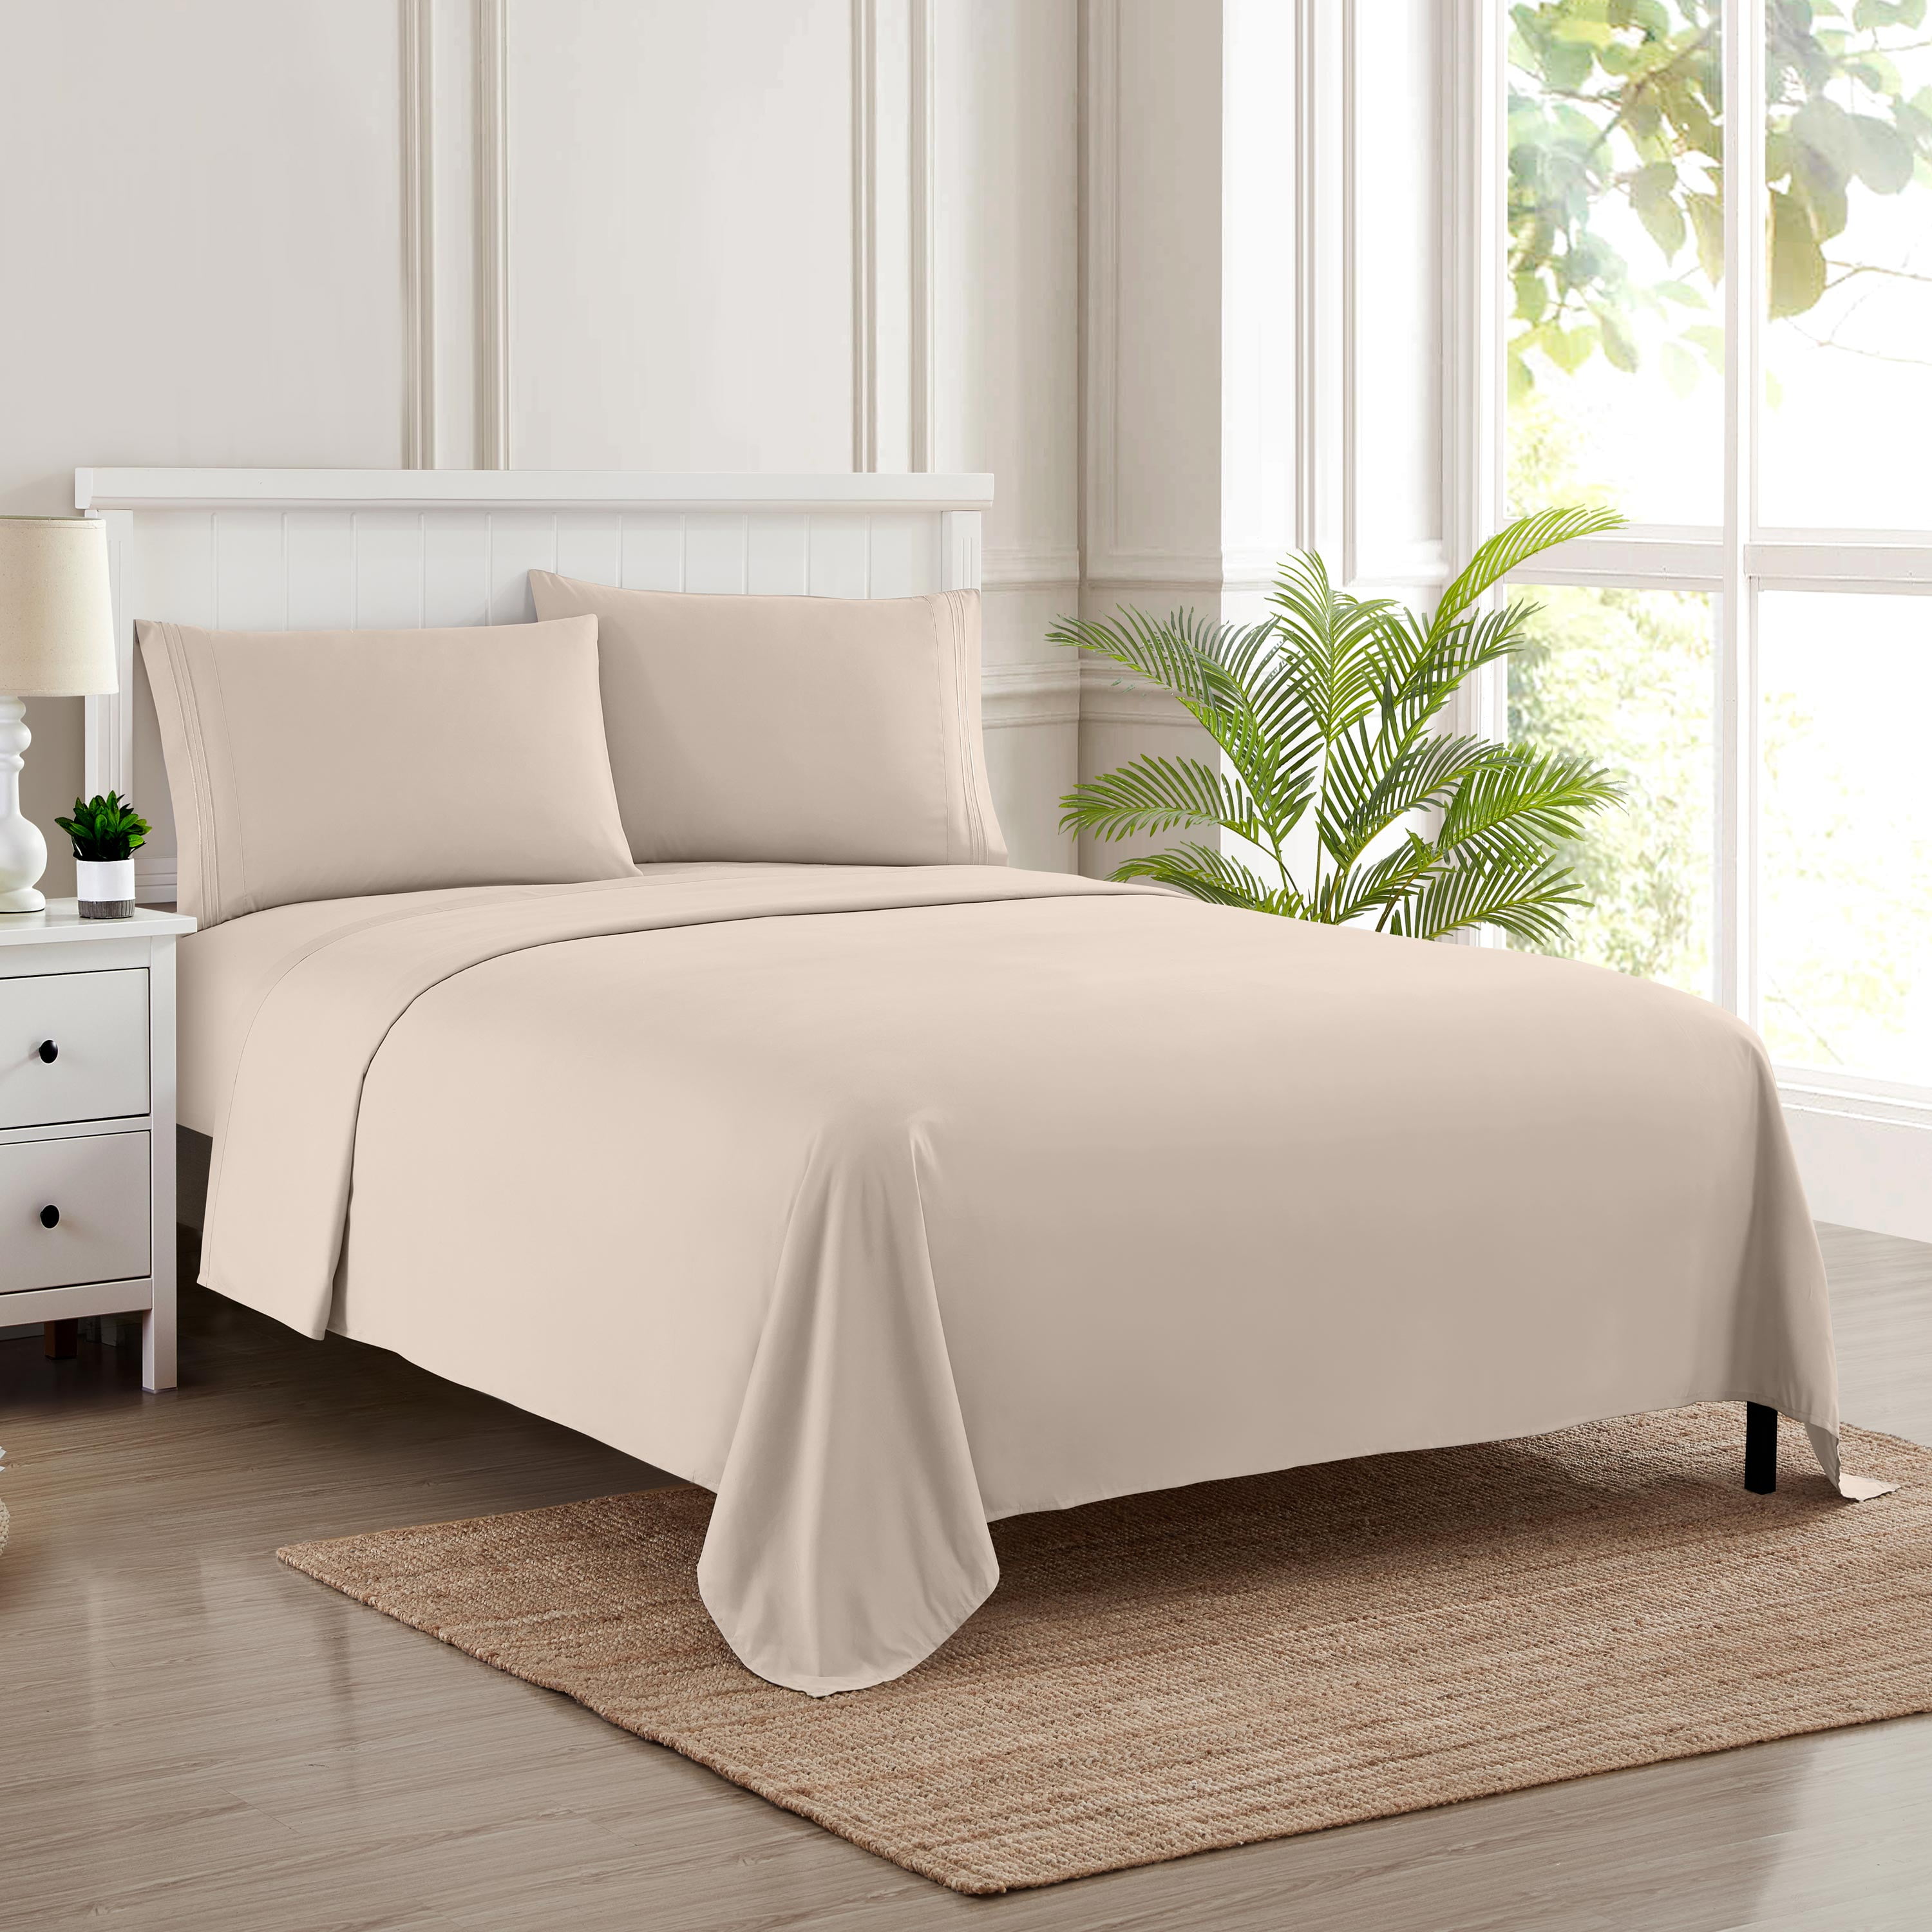 Sweet Home Collection Queen Size Bed Sheets - Breathable Luxury Sheets with  Full Elastic & Secure Corner Straps Built In - 1800 Supreme Collection Ext